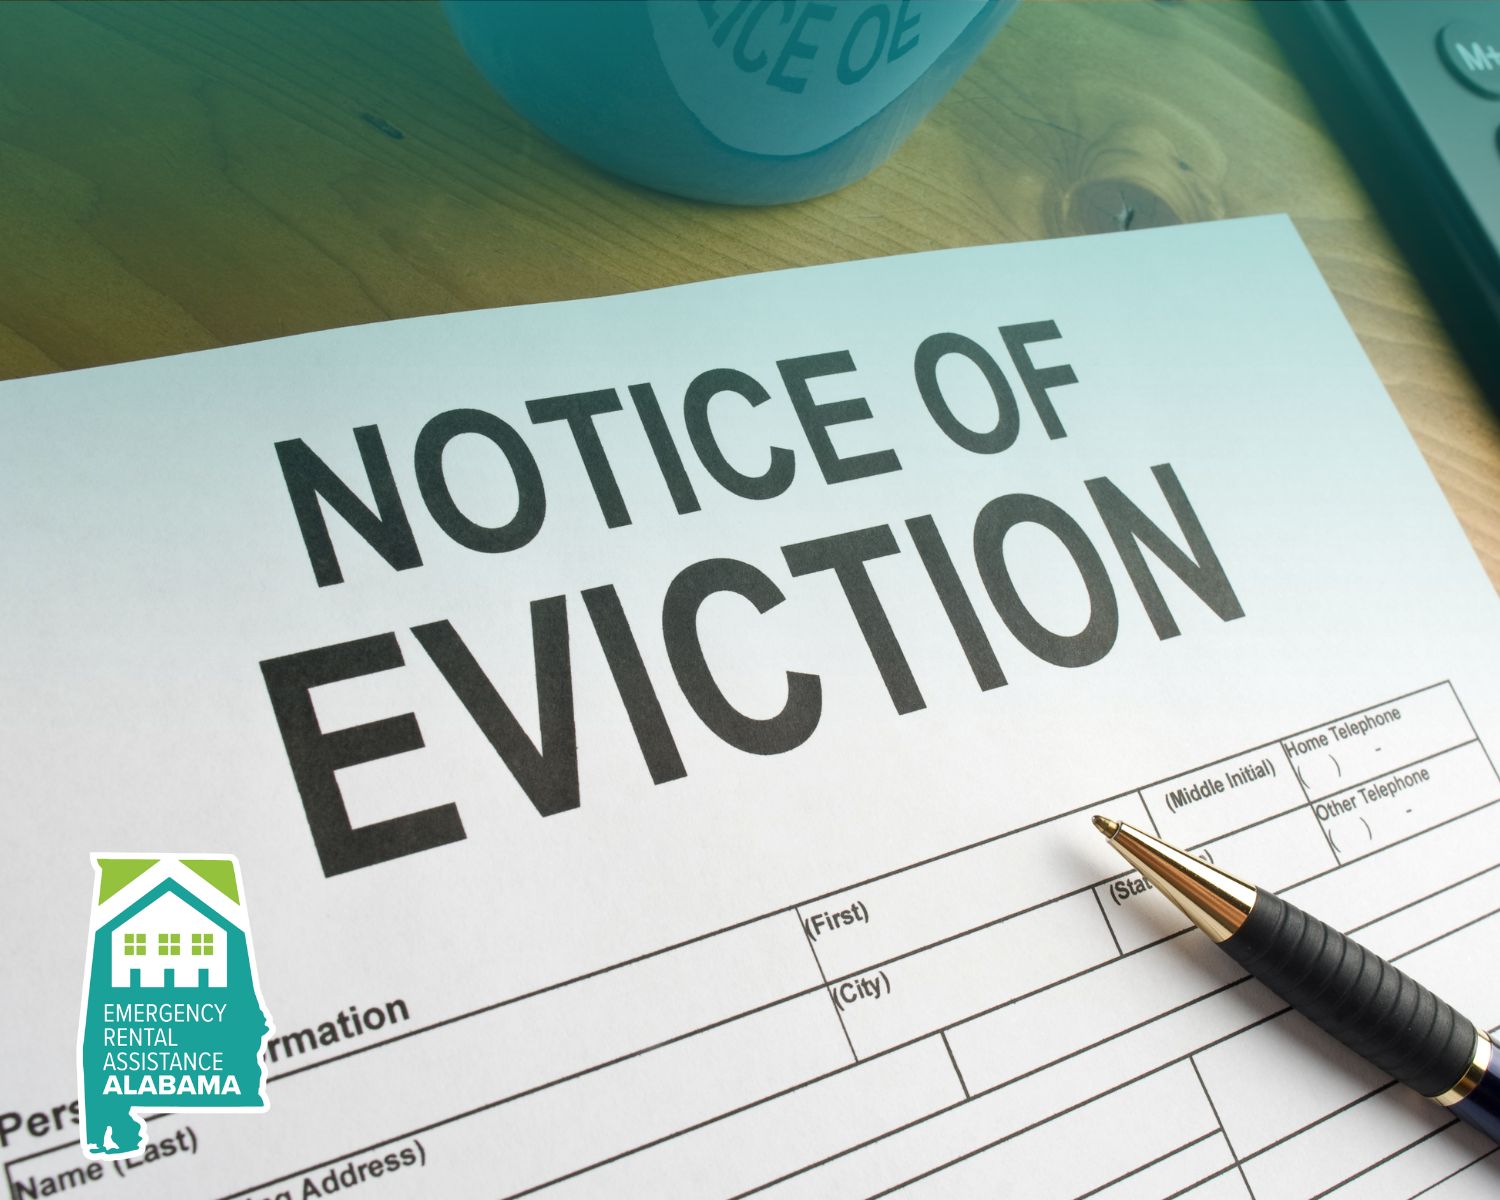 Alabama Housing Finance Authority and Legal Services Alabama Save 3,000 Households from Eviction